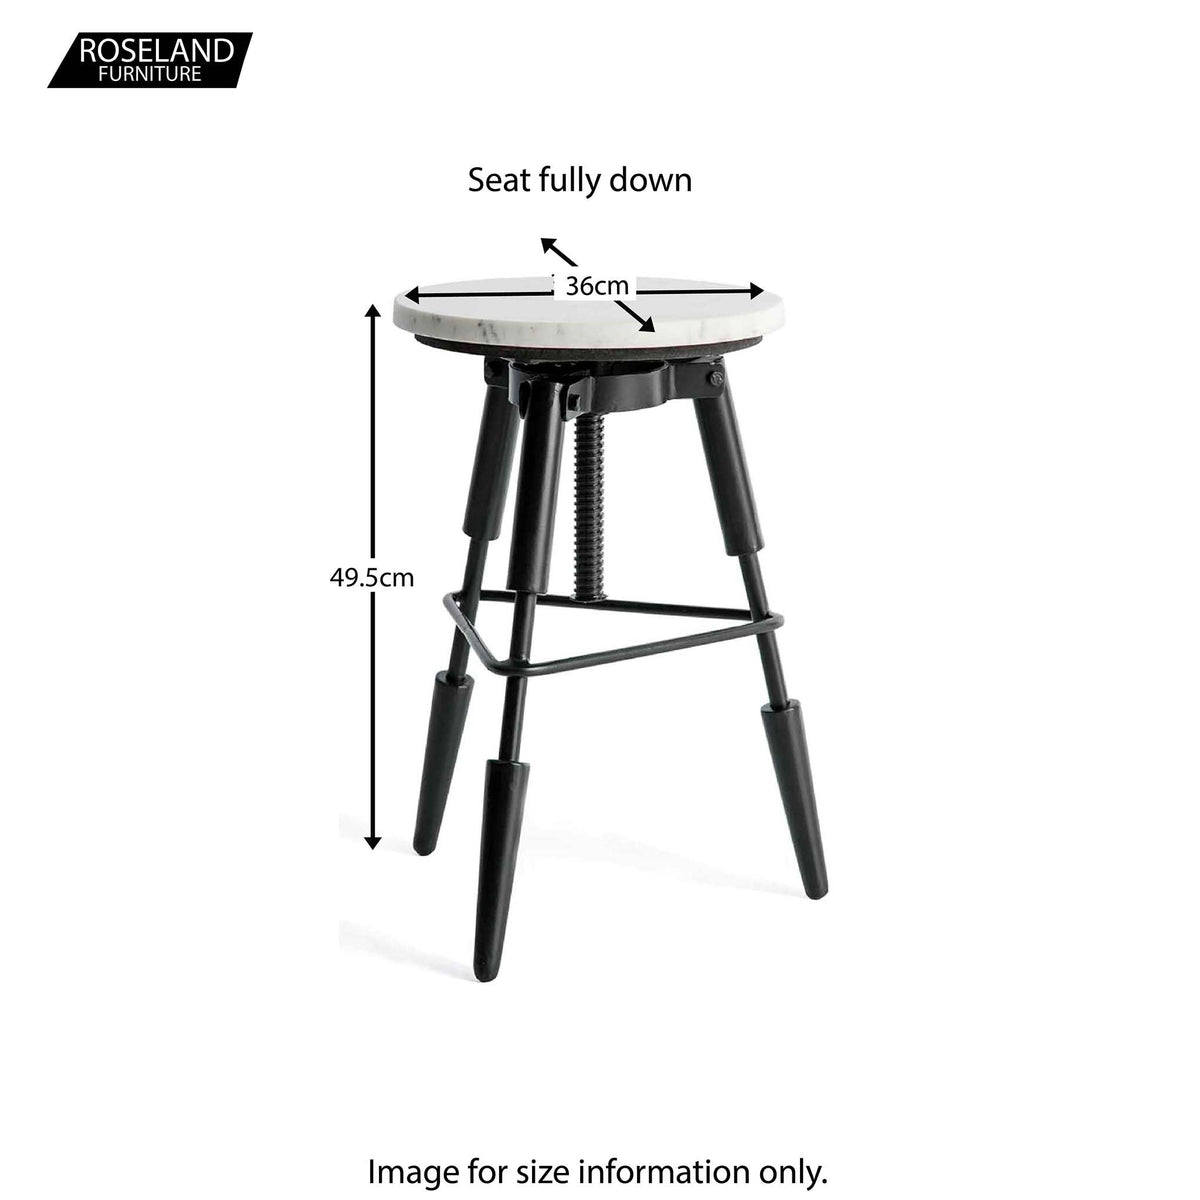 Kandla Black Marble Tripod Stool - Size Guide for Lowest Height